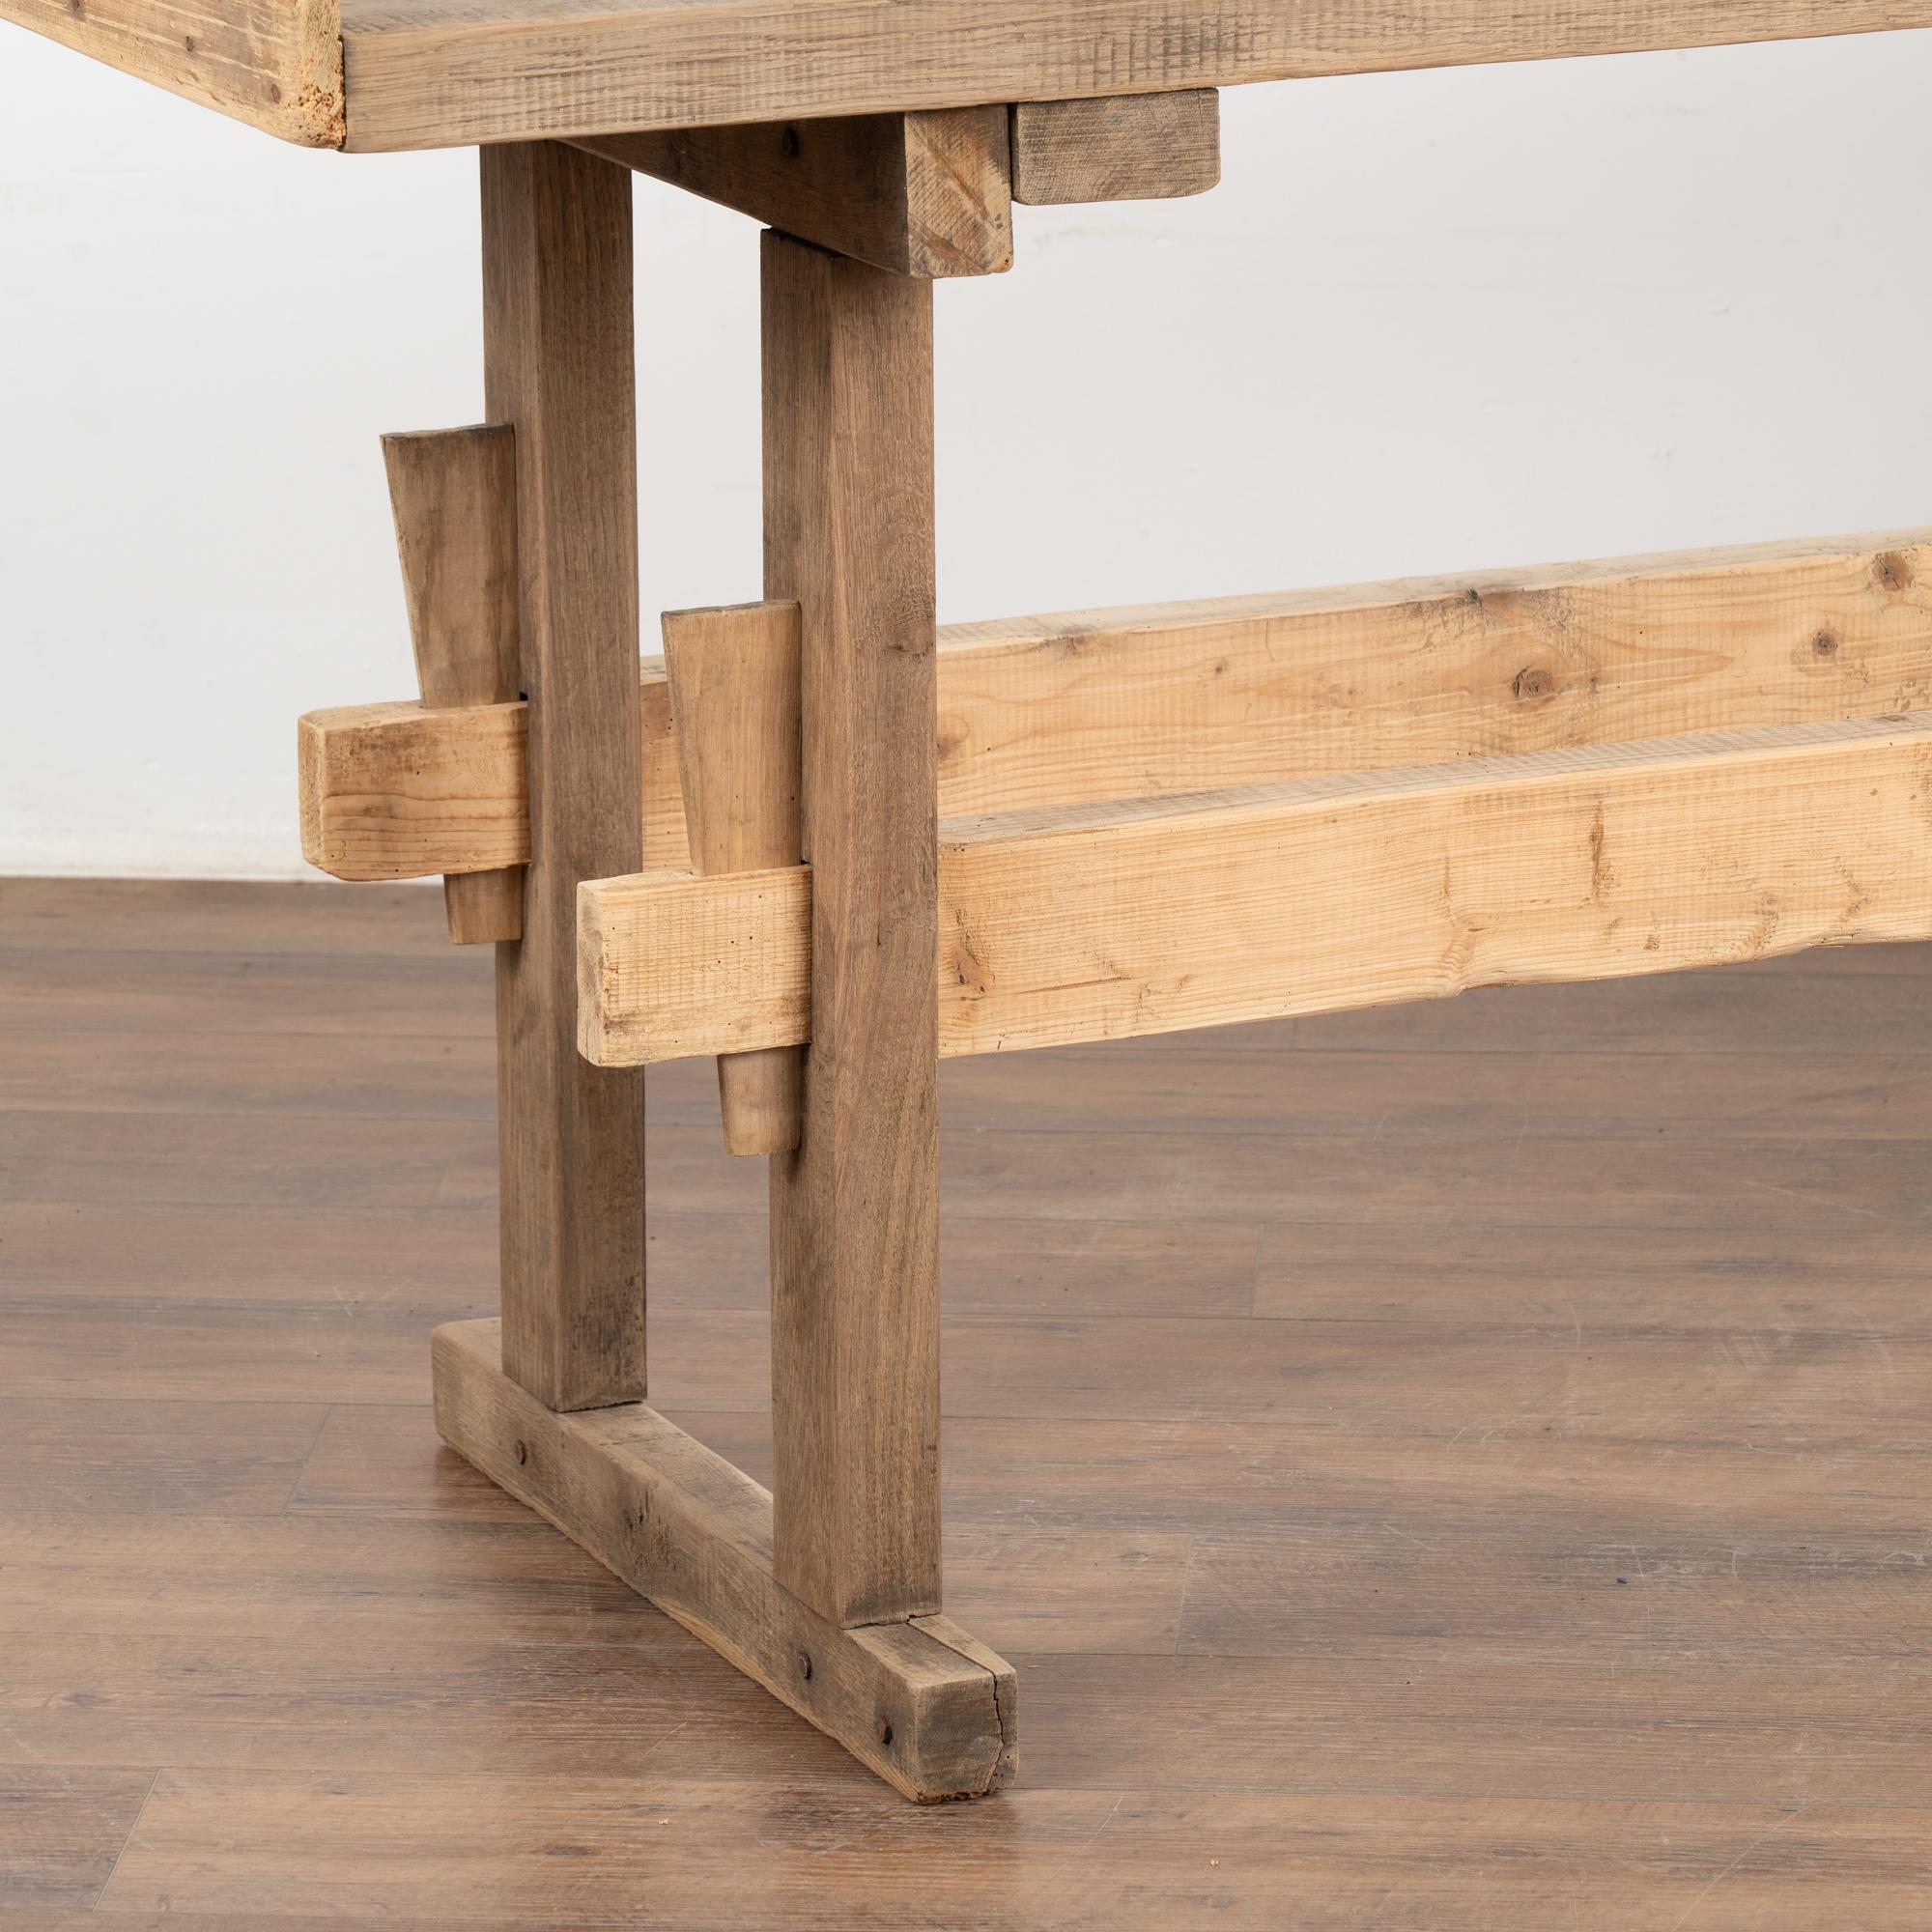 Hungarian Rustic Work Table Console Table, circa 1880 from Hungary For Sale